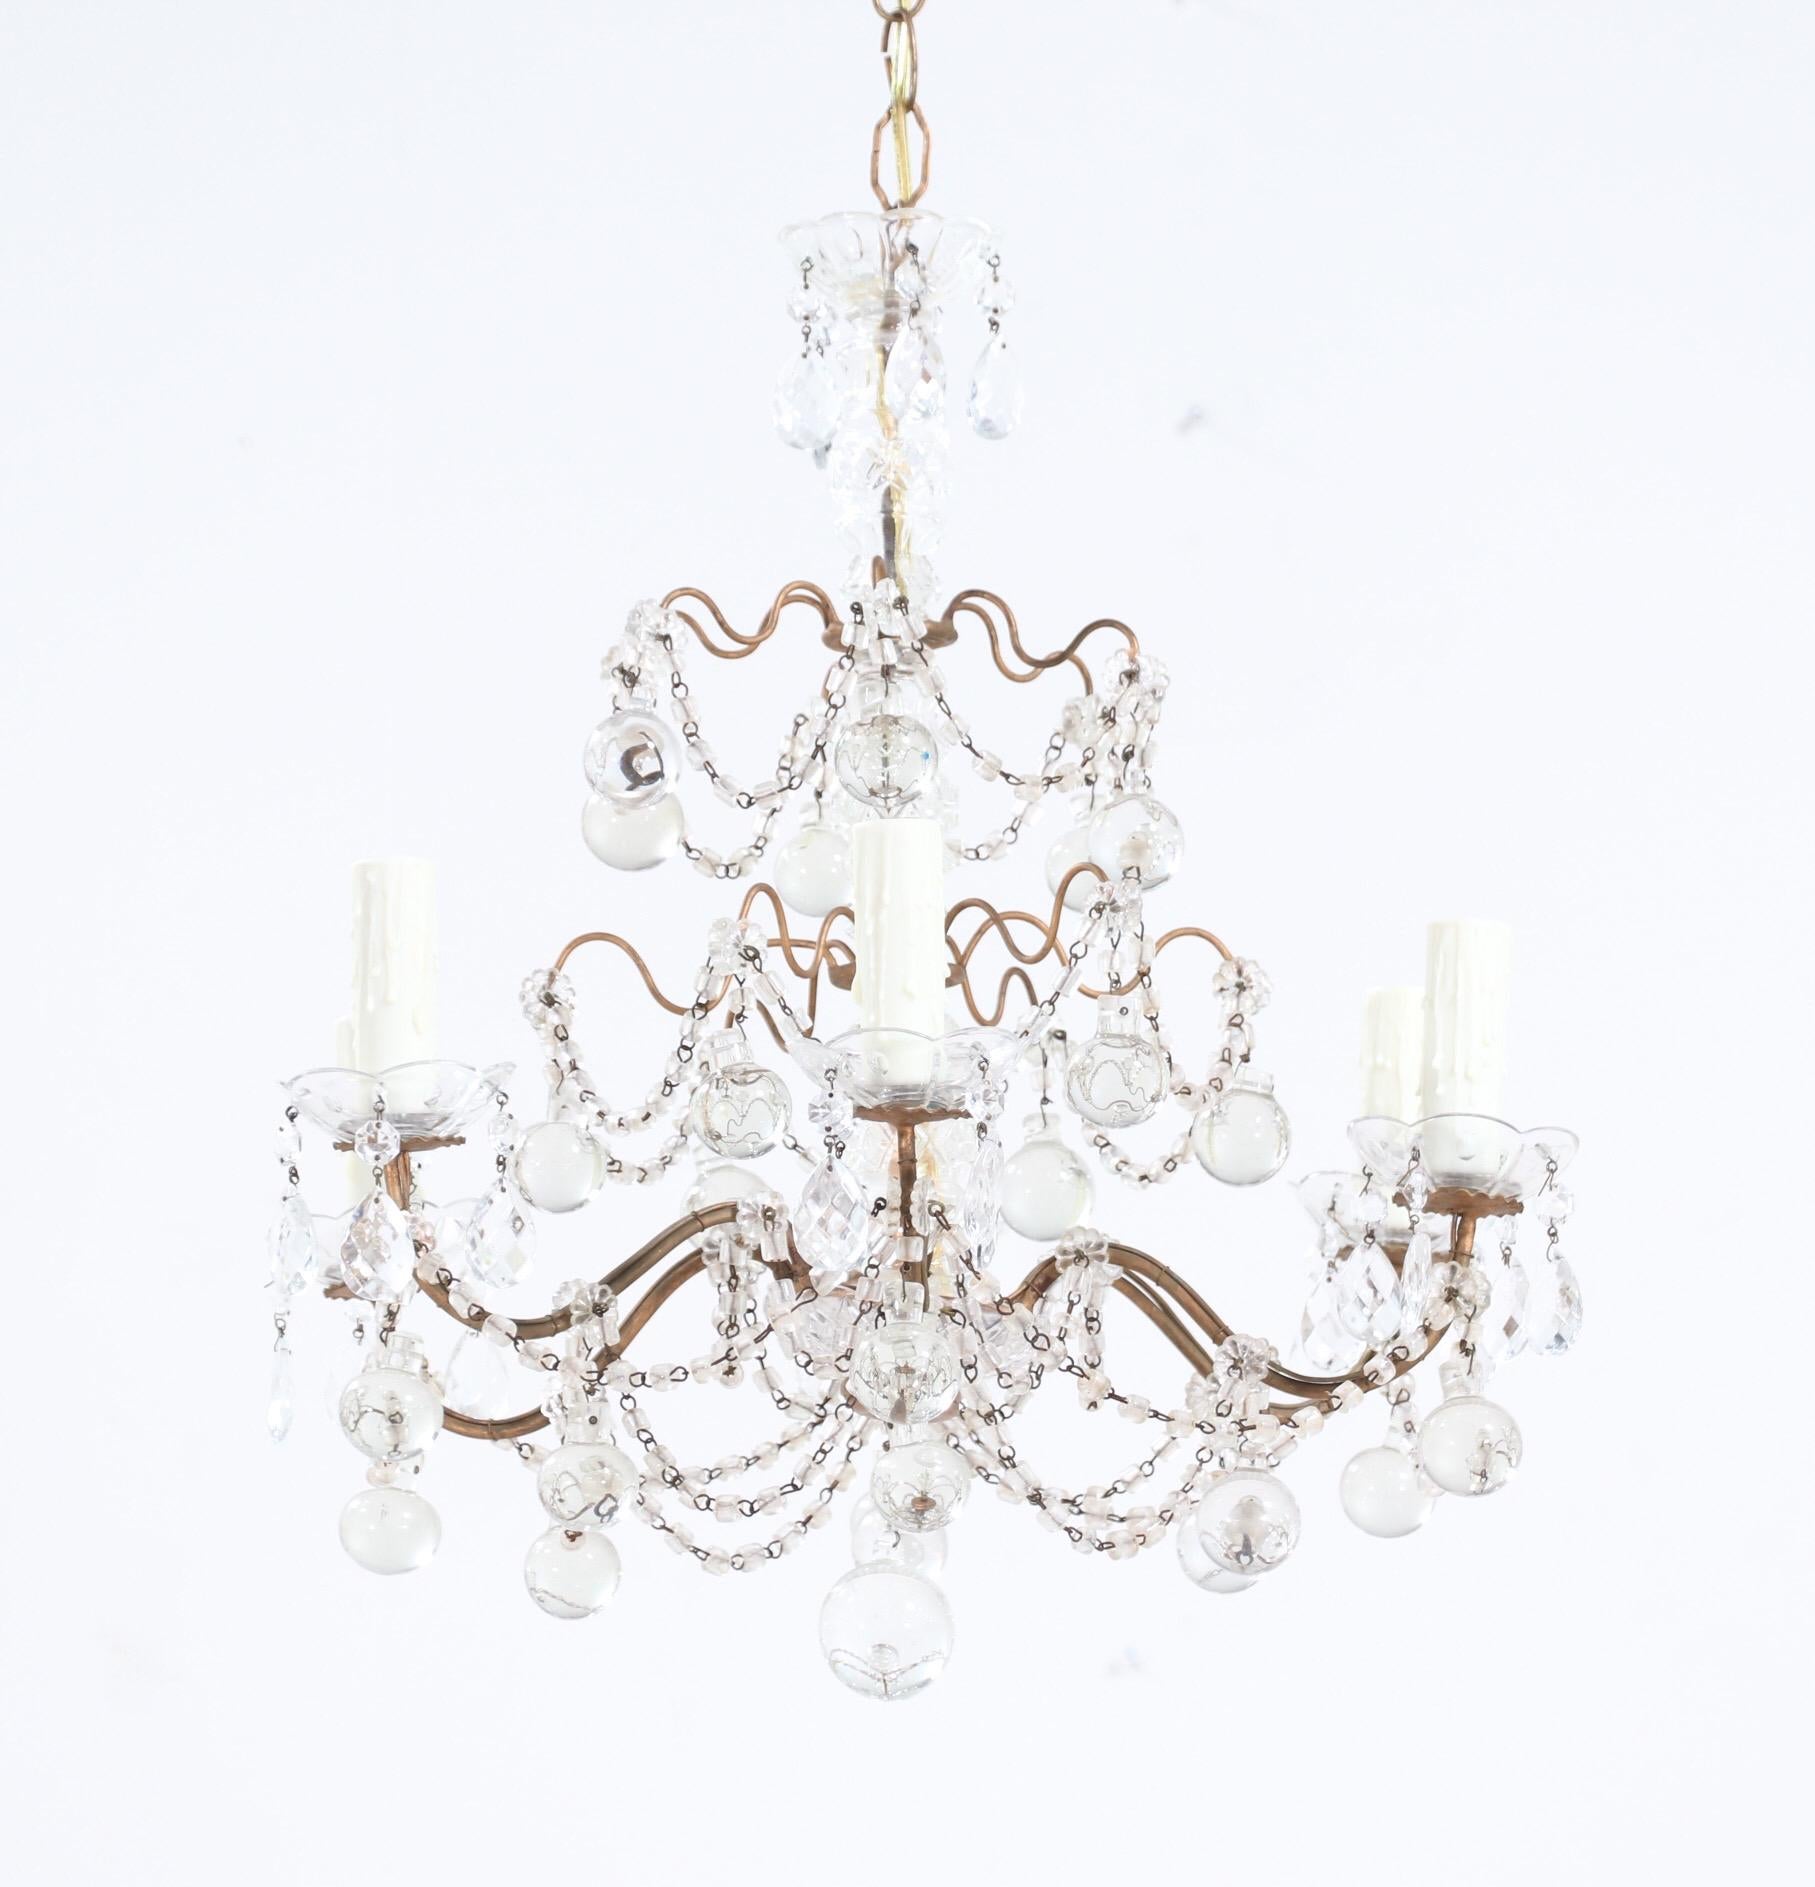 Graceful, 1950s Italian gilt-iron and crystal beaded chandelier.

The chandelier consists of a scrolled gilt-iron frame with a glass column at its center. The chandelier is beautifully decorated with macaroni bead swags and large glass ball